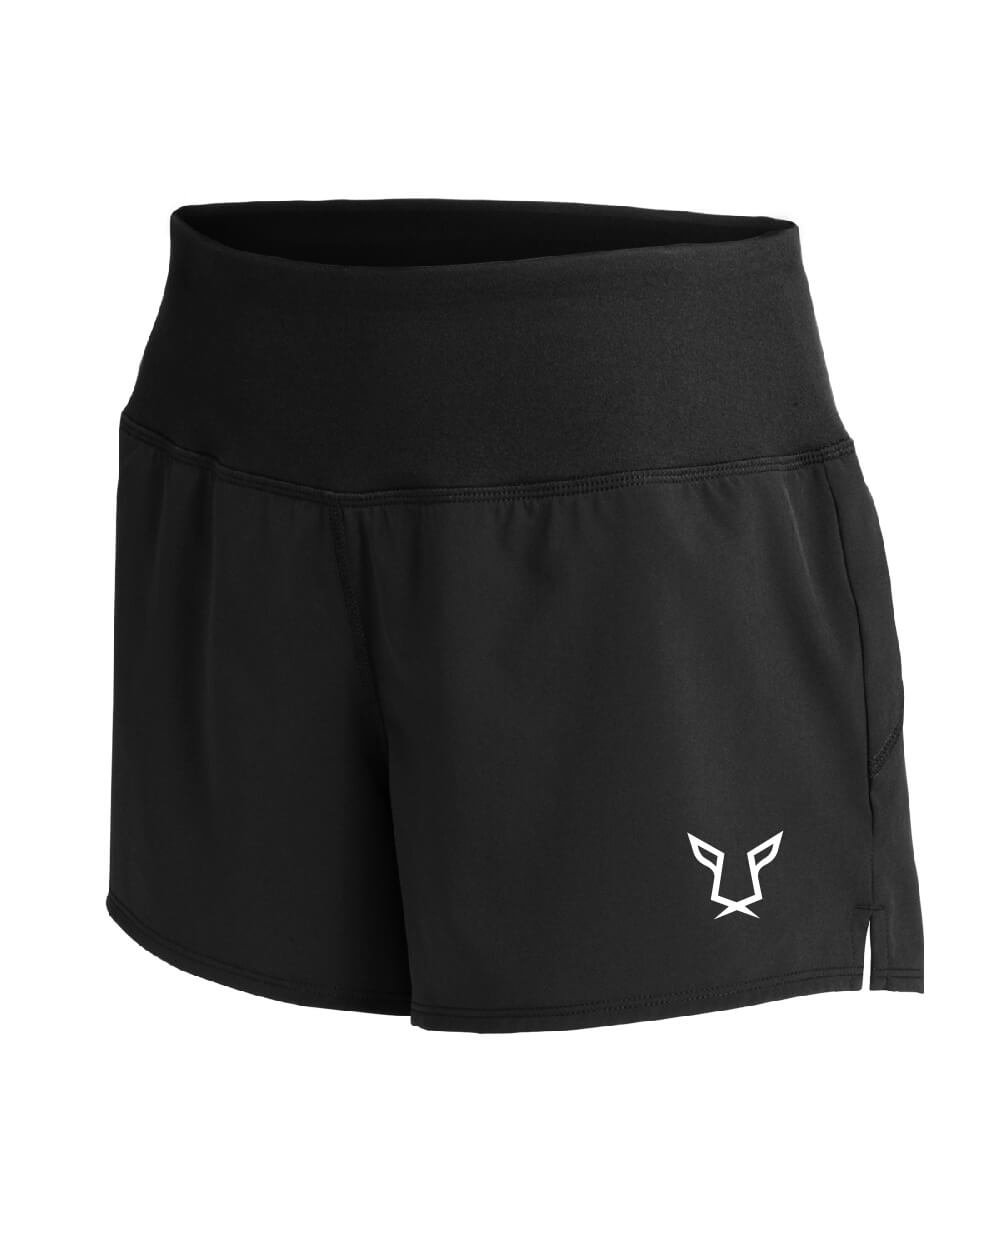 Women's Black Evolution Performance Shorts (Front) by Odisi Apparel